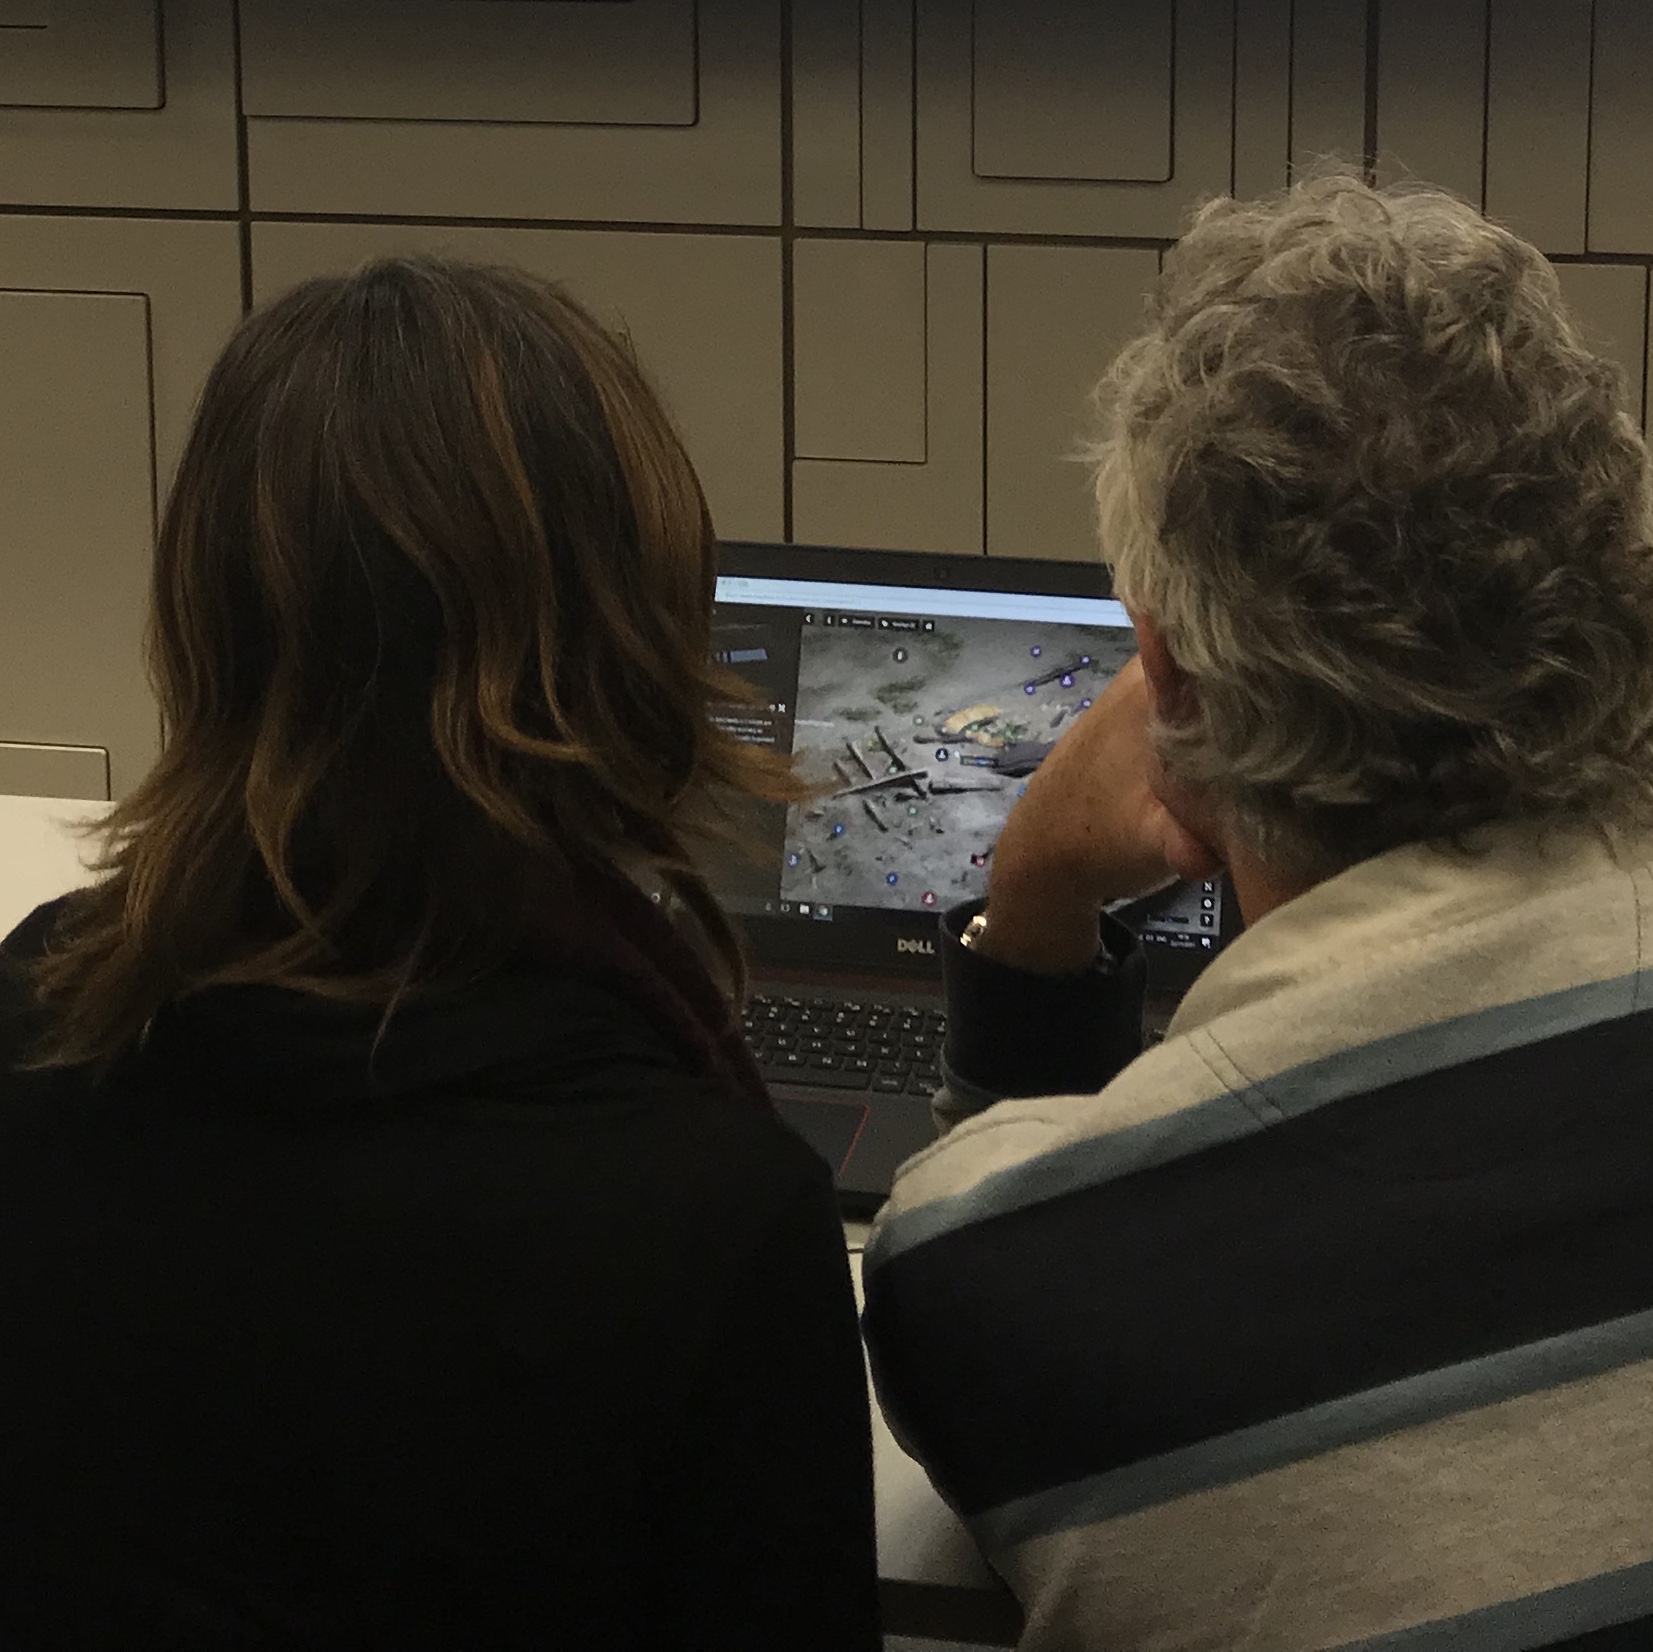 Man and woman watching a virtual wreck site tour on a laptop